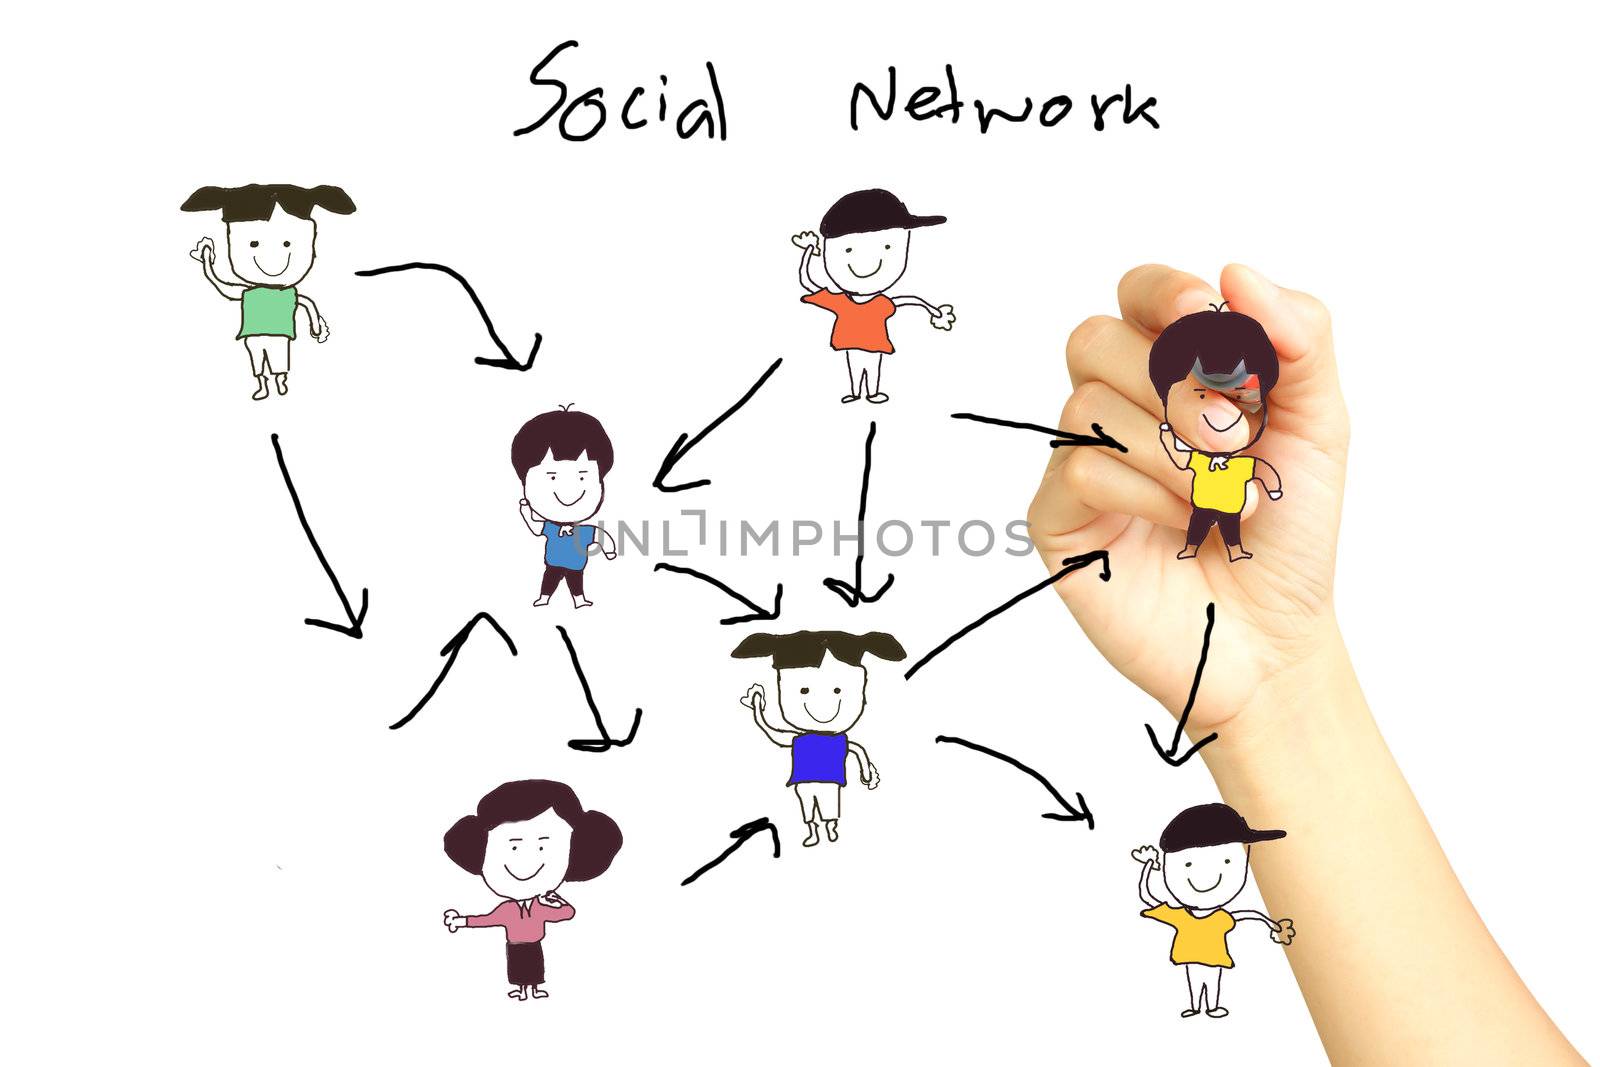 drawing social network structure in a whiteboard